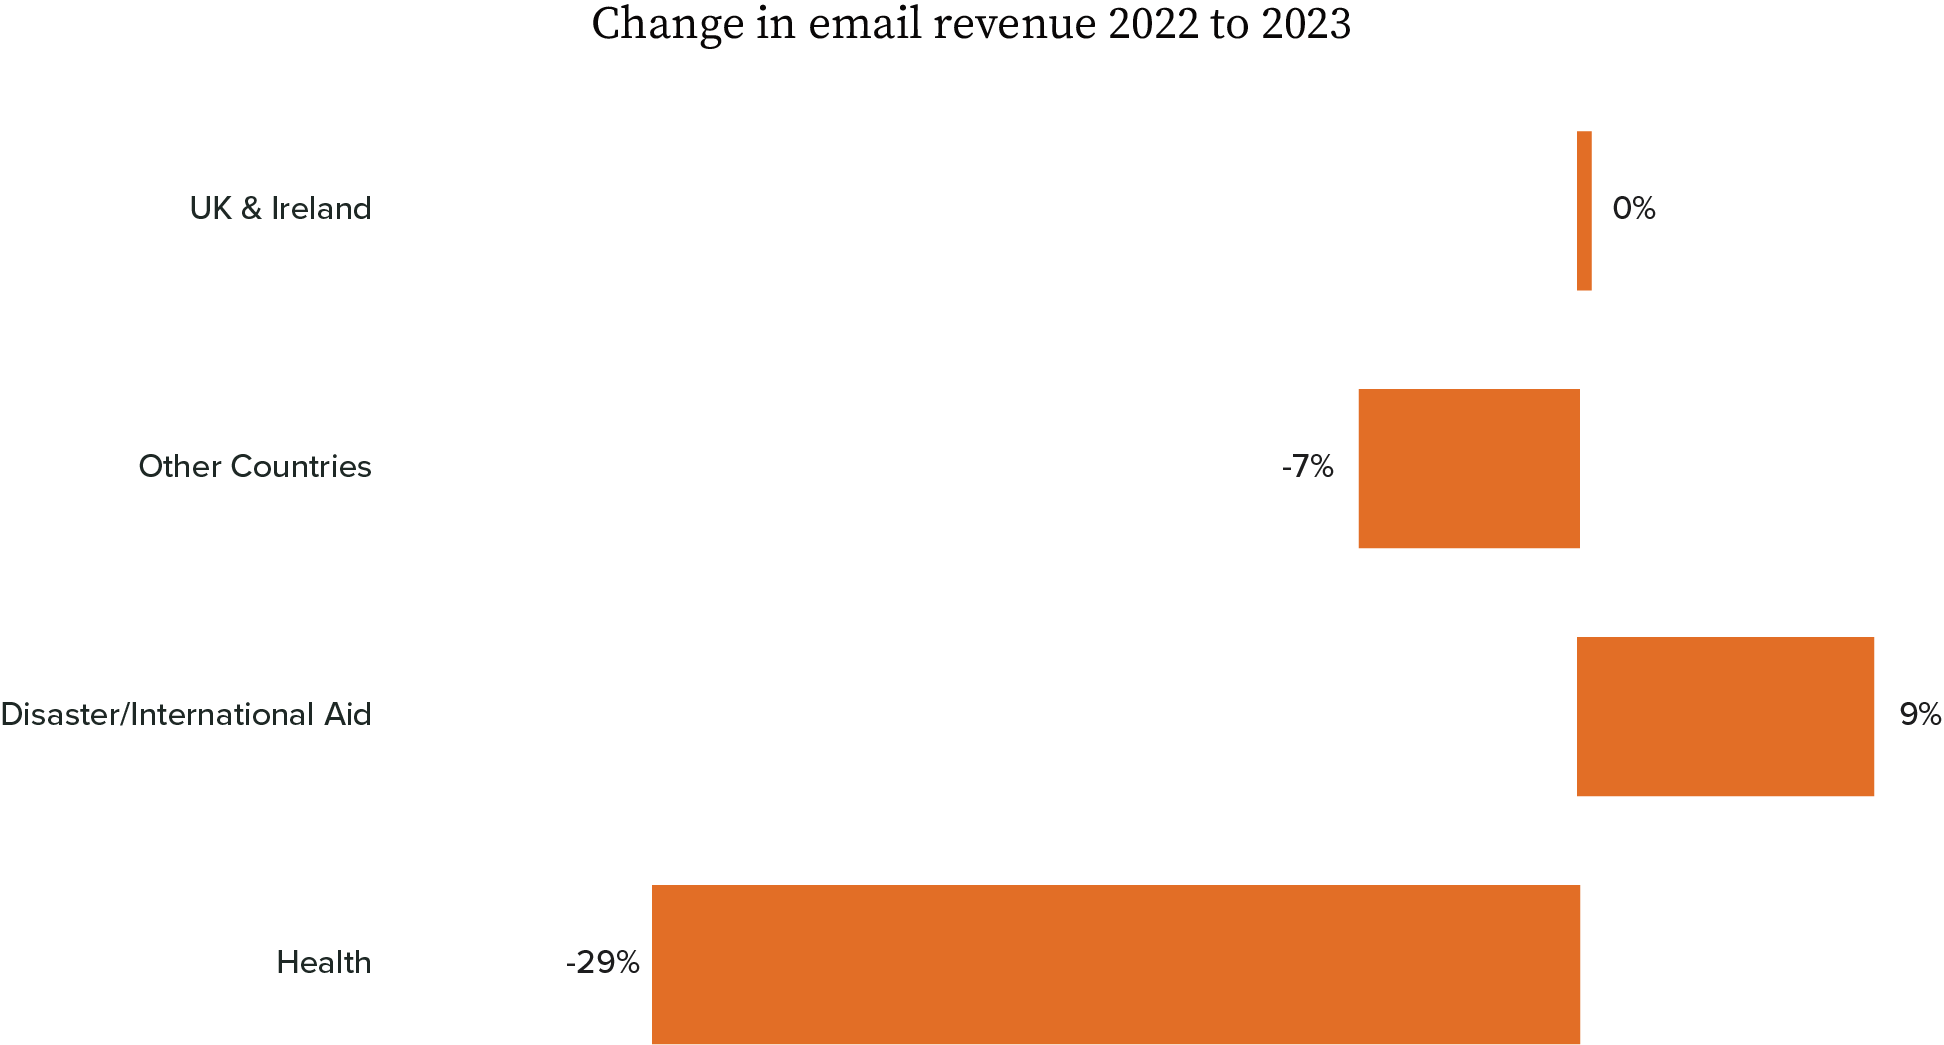 Change in Email Revenue 2022 to 2023